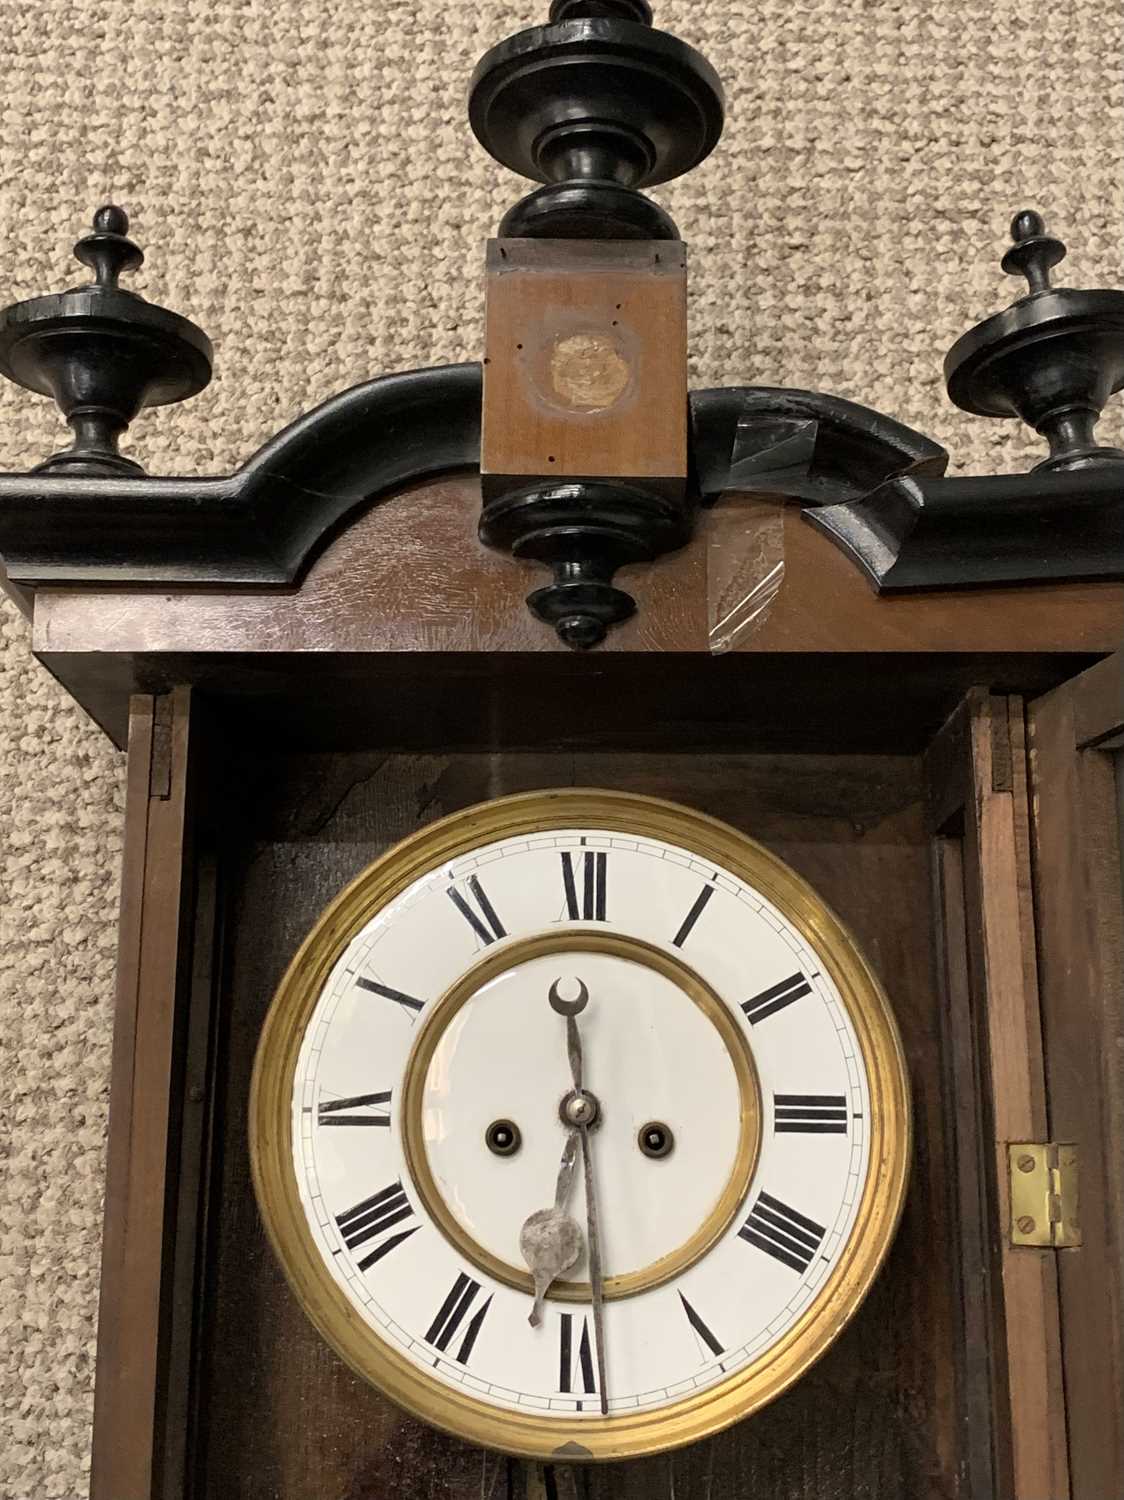 LATE VICTORIAN VIENNA TYPE WALL CLOCK, walnut and ebonised case, white dial, Roman numerals, twin - Image 3 of 6